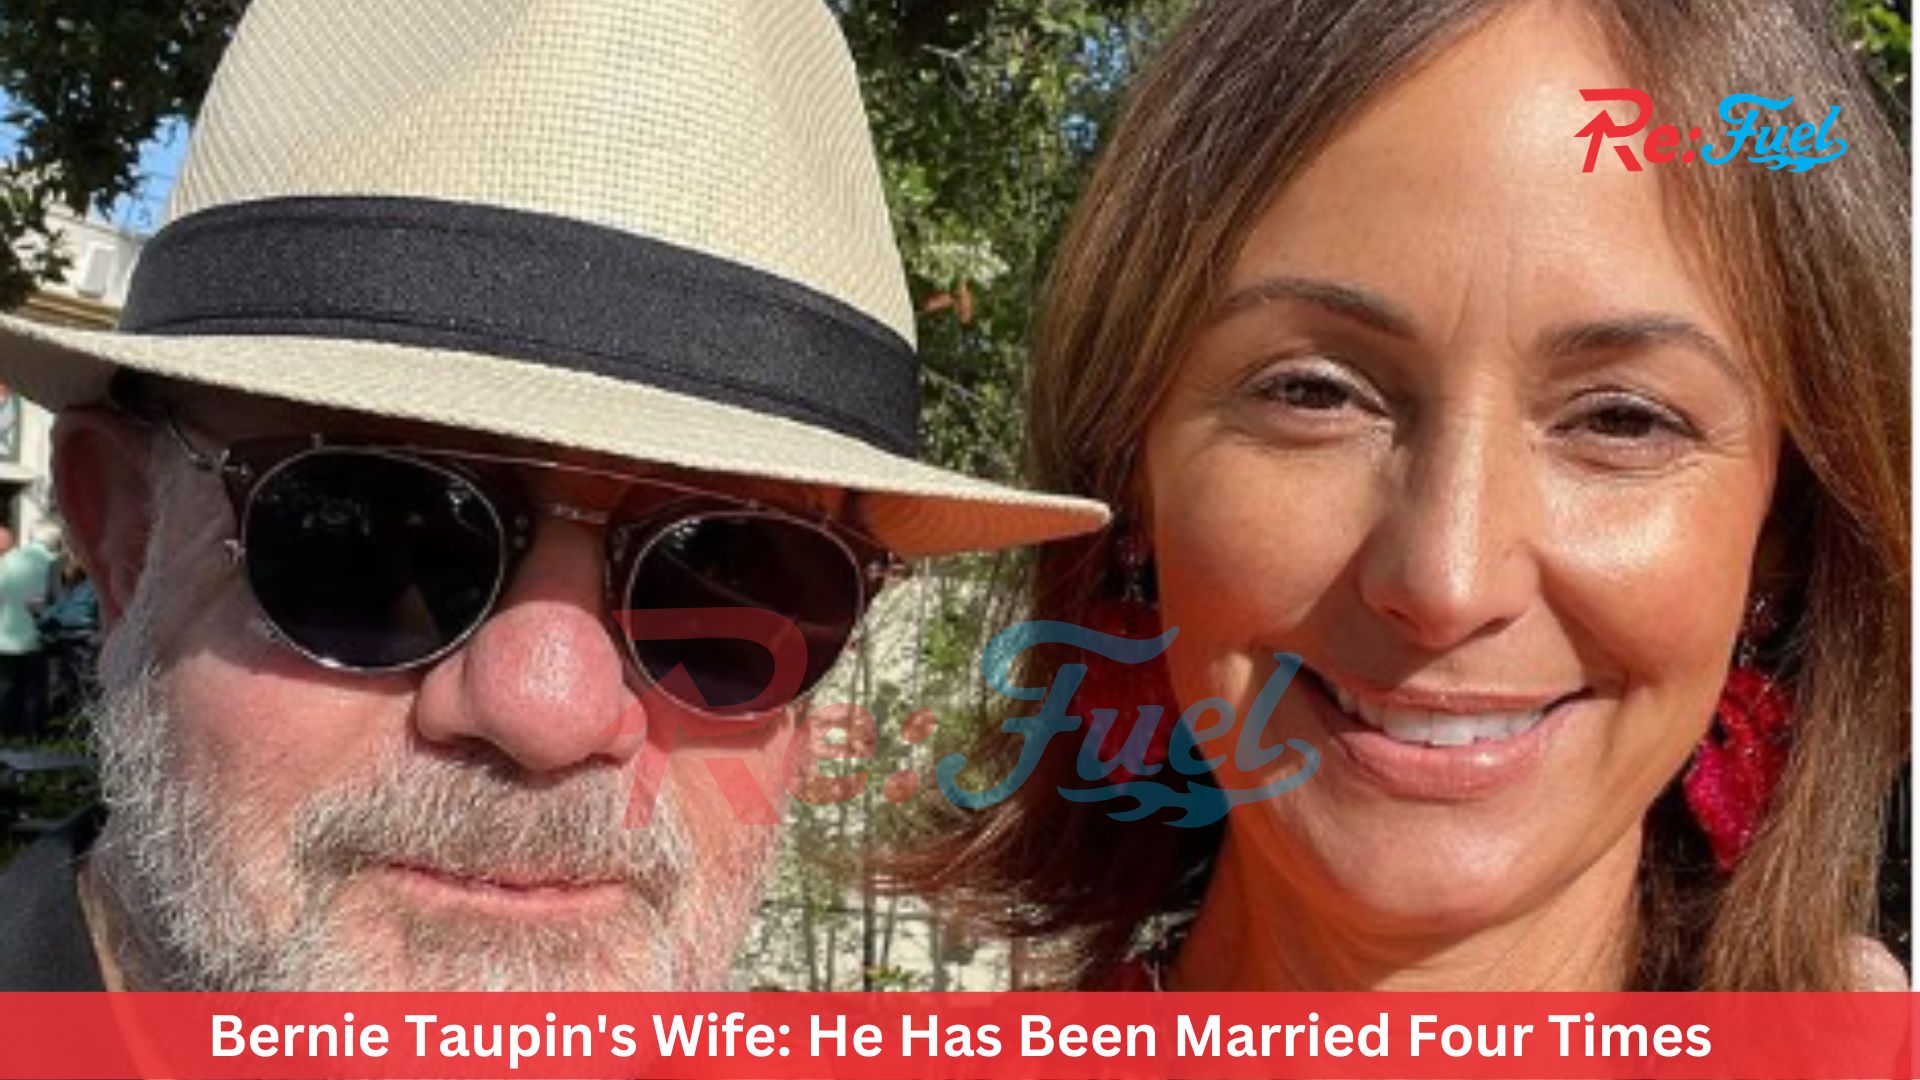 Bernie Taupin's Wife: He Has Been Married Four Times